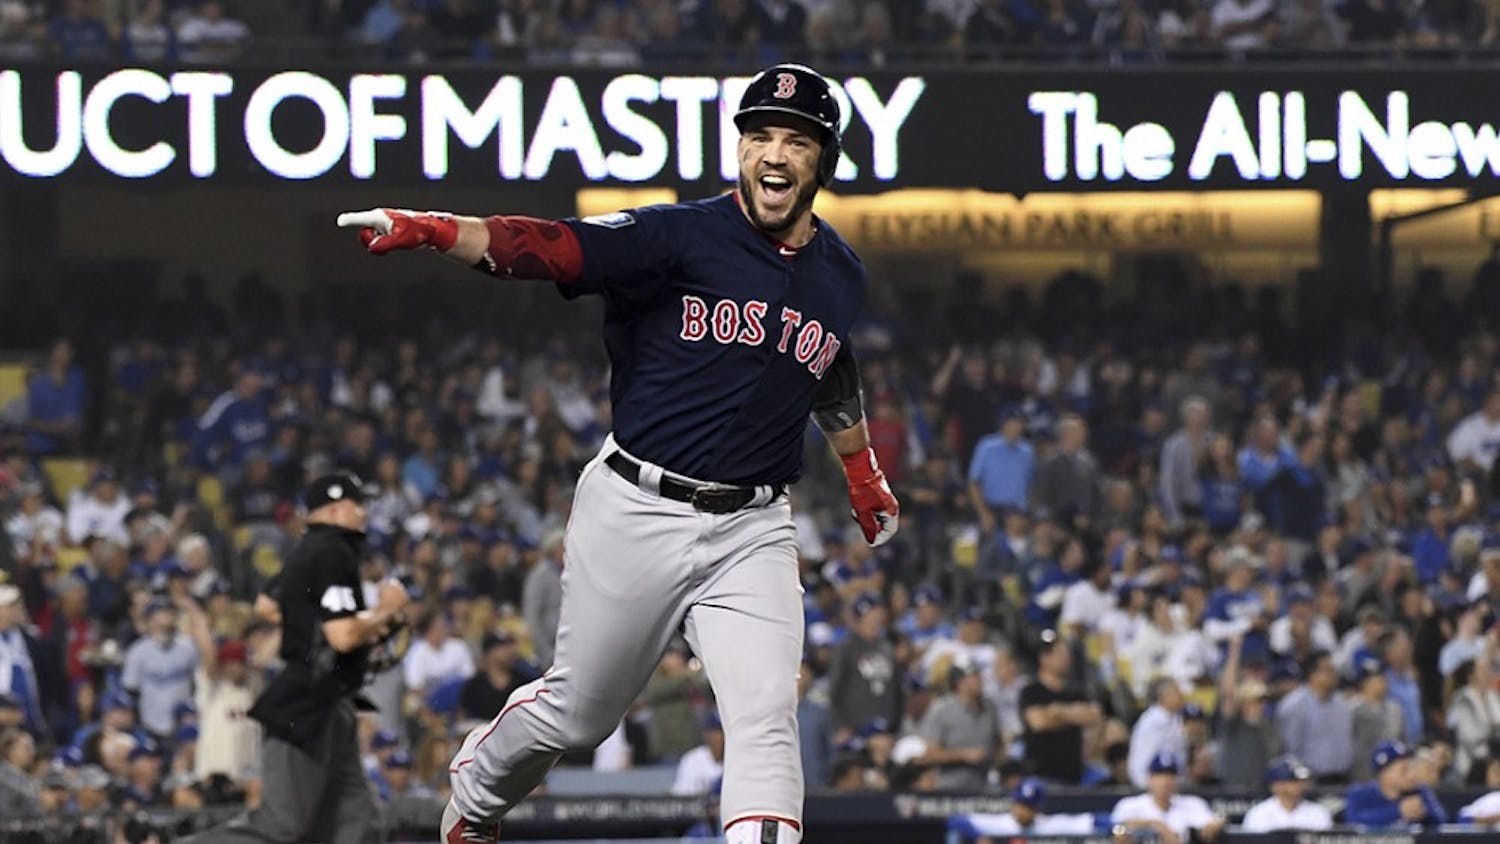 Boston Red Sox&apos;s Steve Pearce celebrates his second home run of the game against the Los Angeles Dodgers in the eighth inning during Game 5 of the World Series on Sunday, Oct. 28, 2018 at Dodger Stadium in Los Angeles, Calif. (Wally Skalij/Los Angeles Times/TNS)